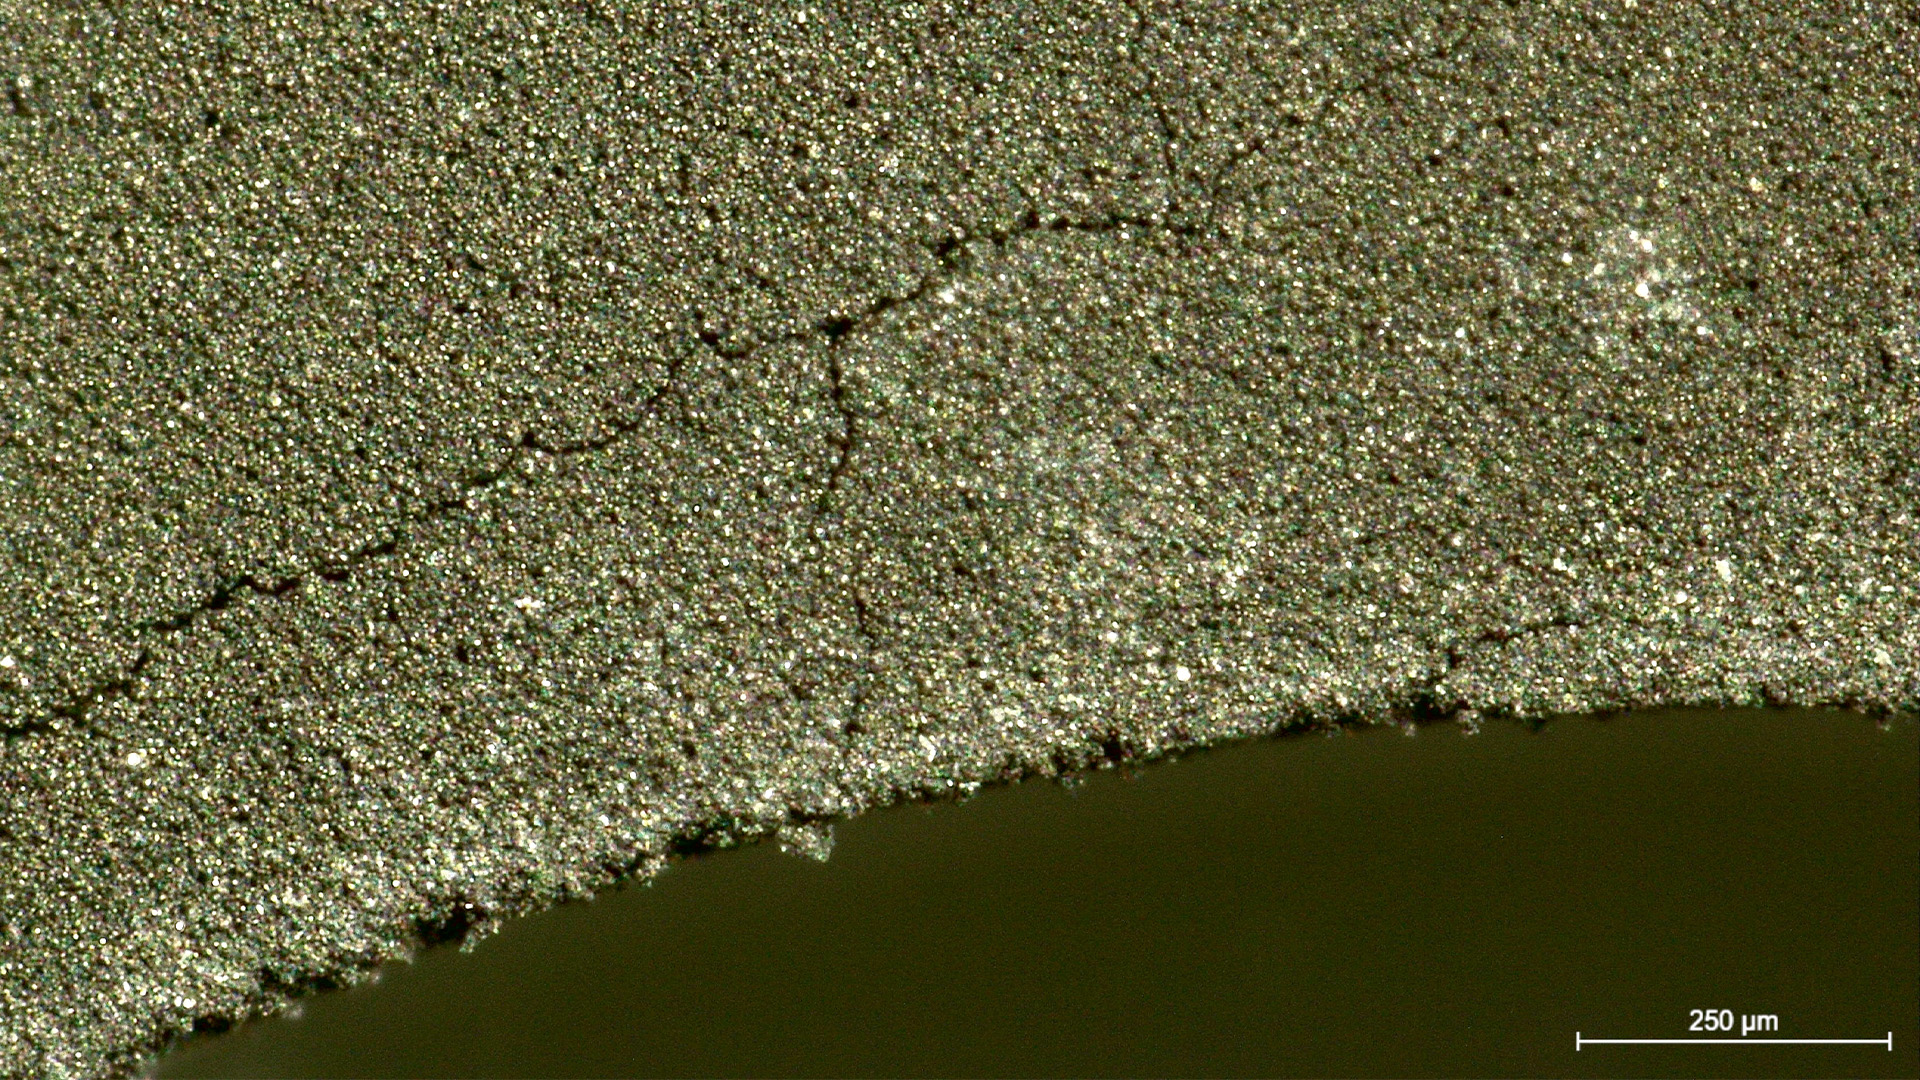 Battery electrode which has cracks and burrs at the edges. Image taken with a DVM6 digital microscope.